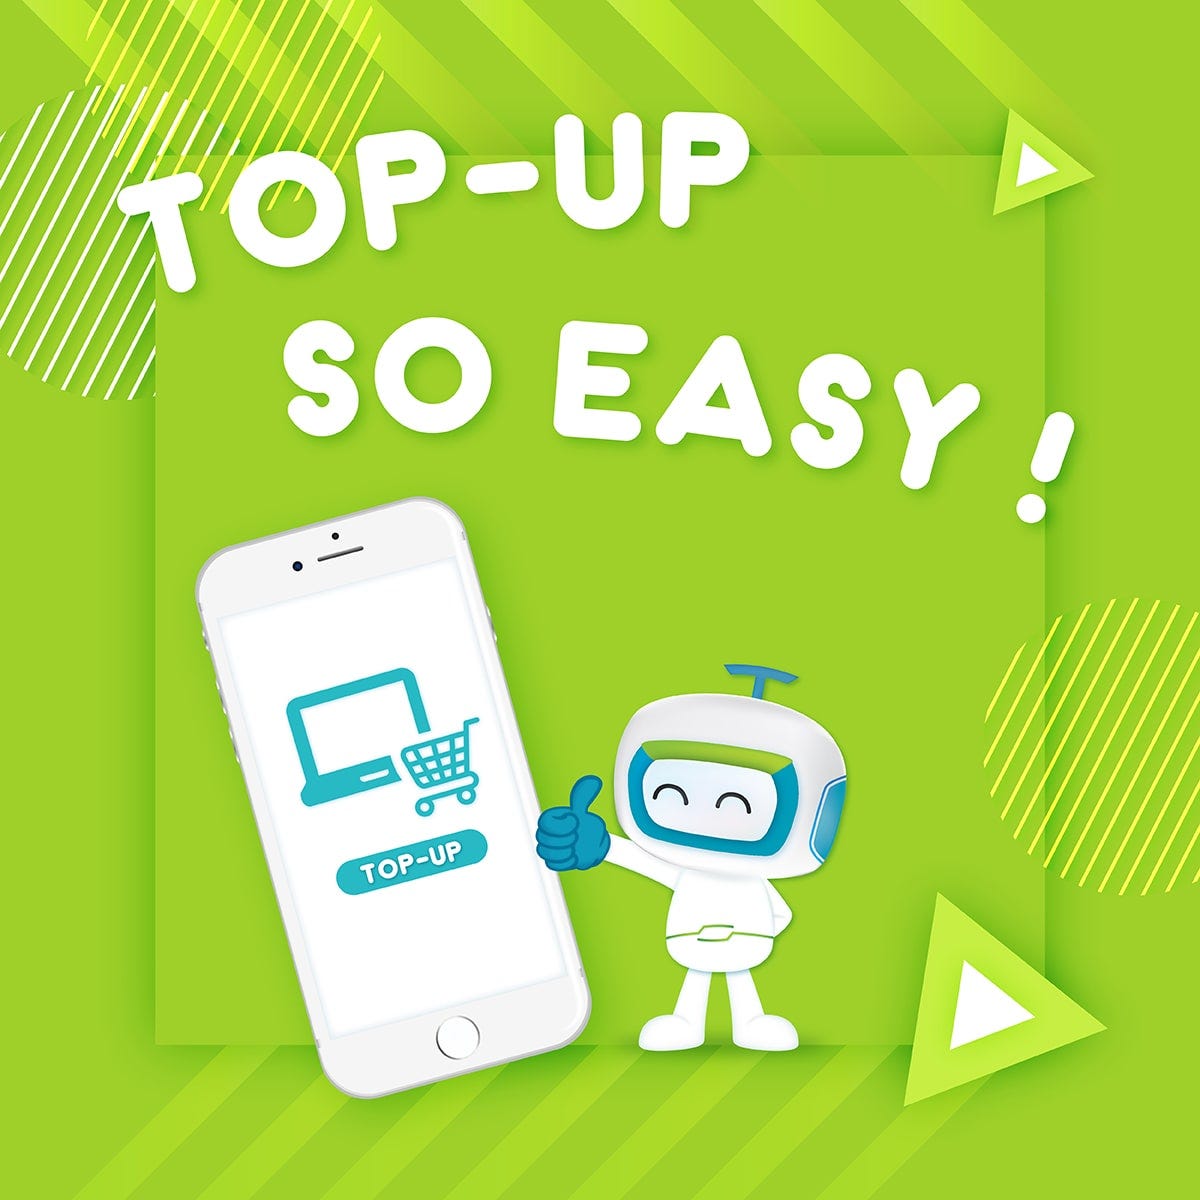 E Top-Up and Different Ways to Easily Top Up Your Mobile Phone | by CNG  Business Services | Medium